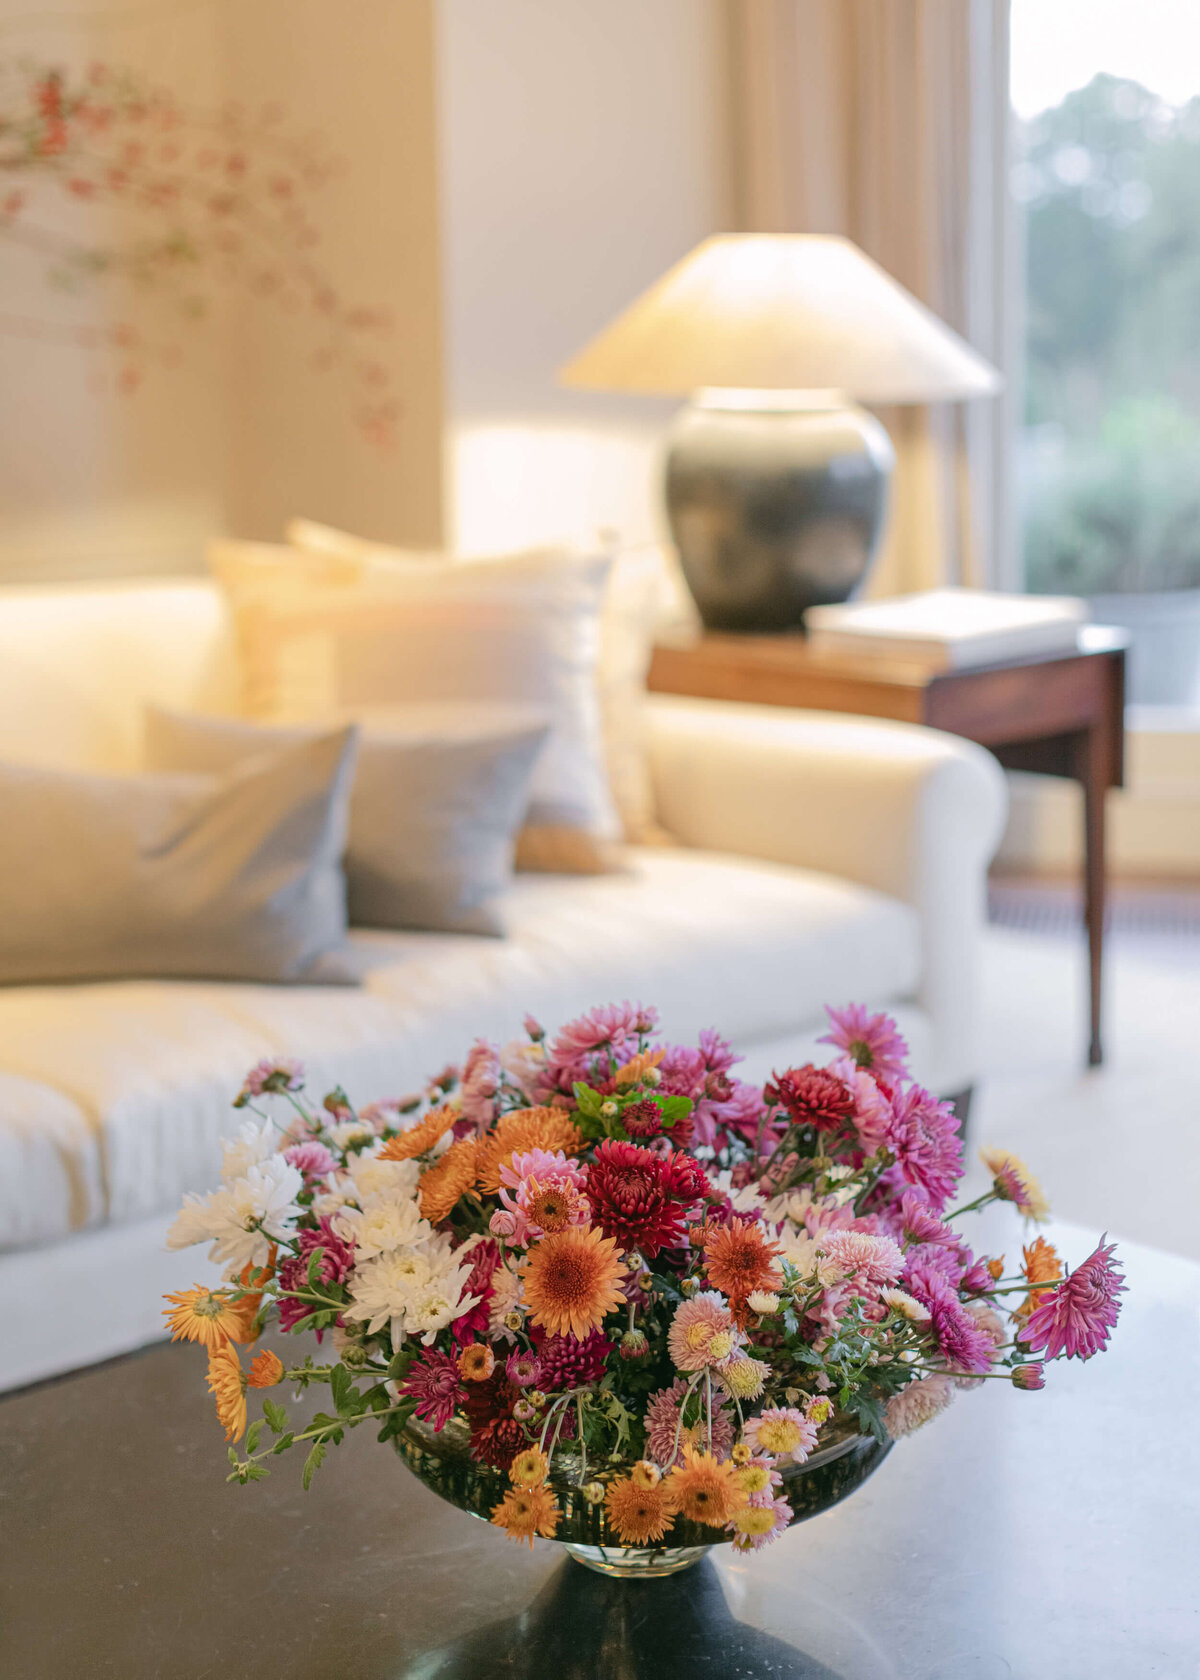 chloe-winstanley-events-heckfield-place-interiors-flowers